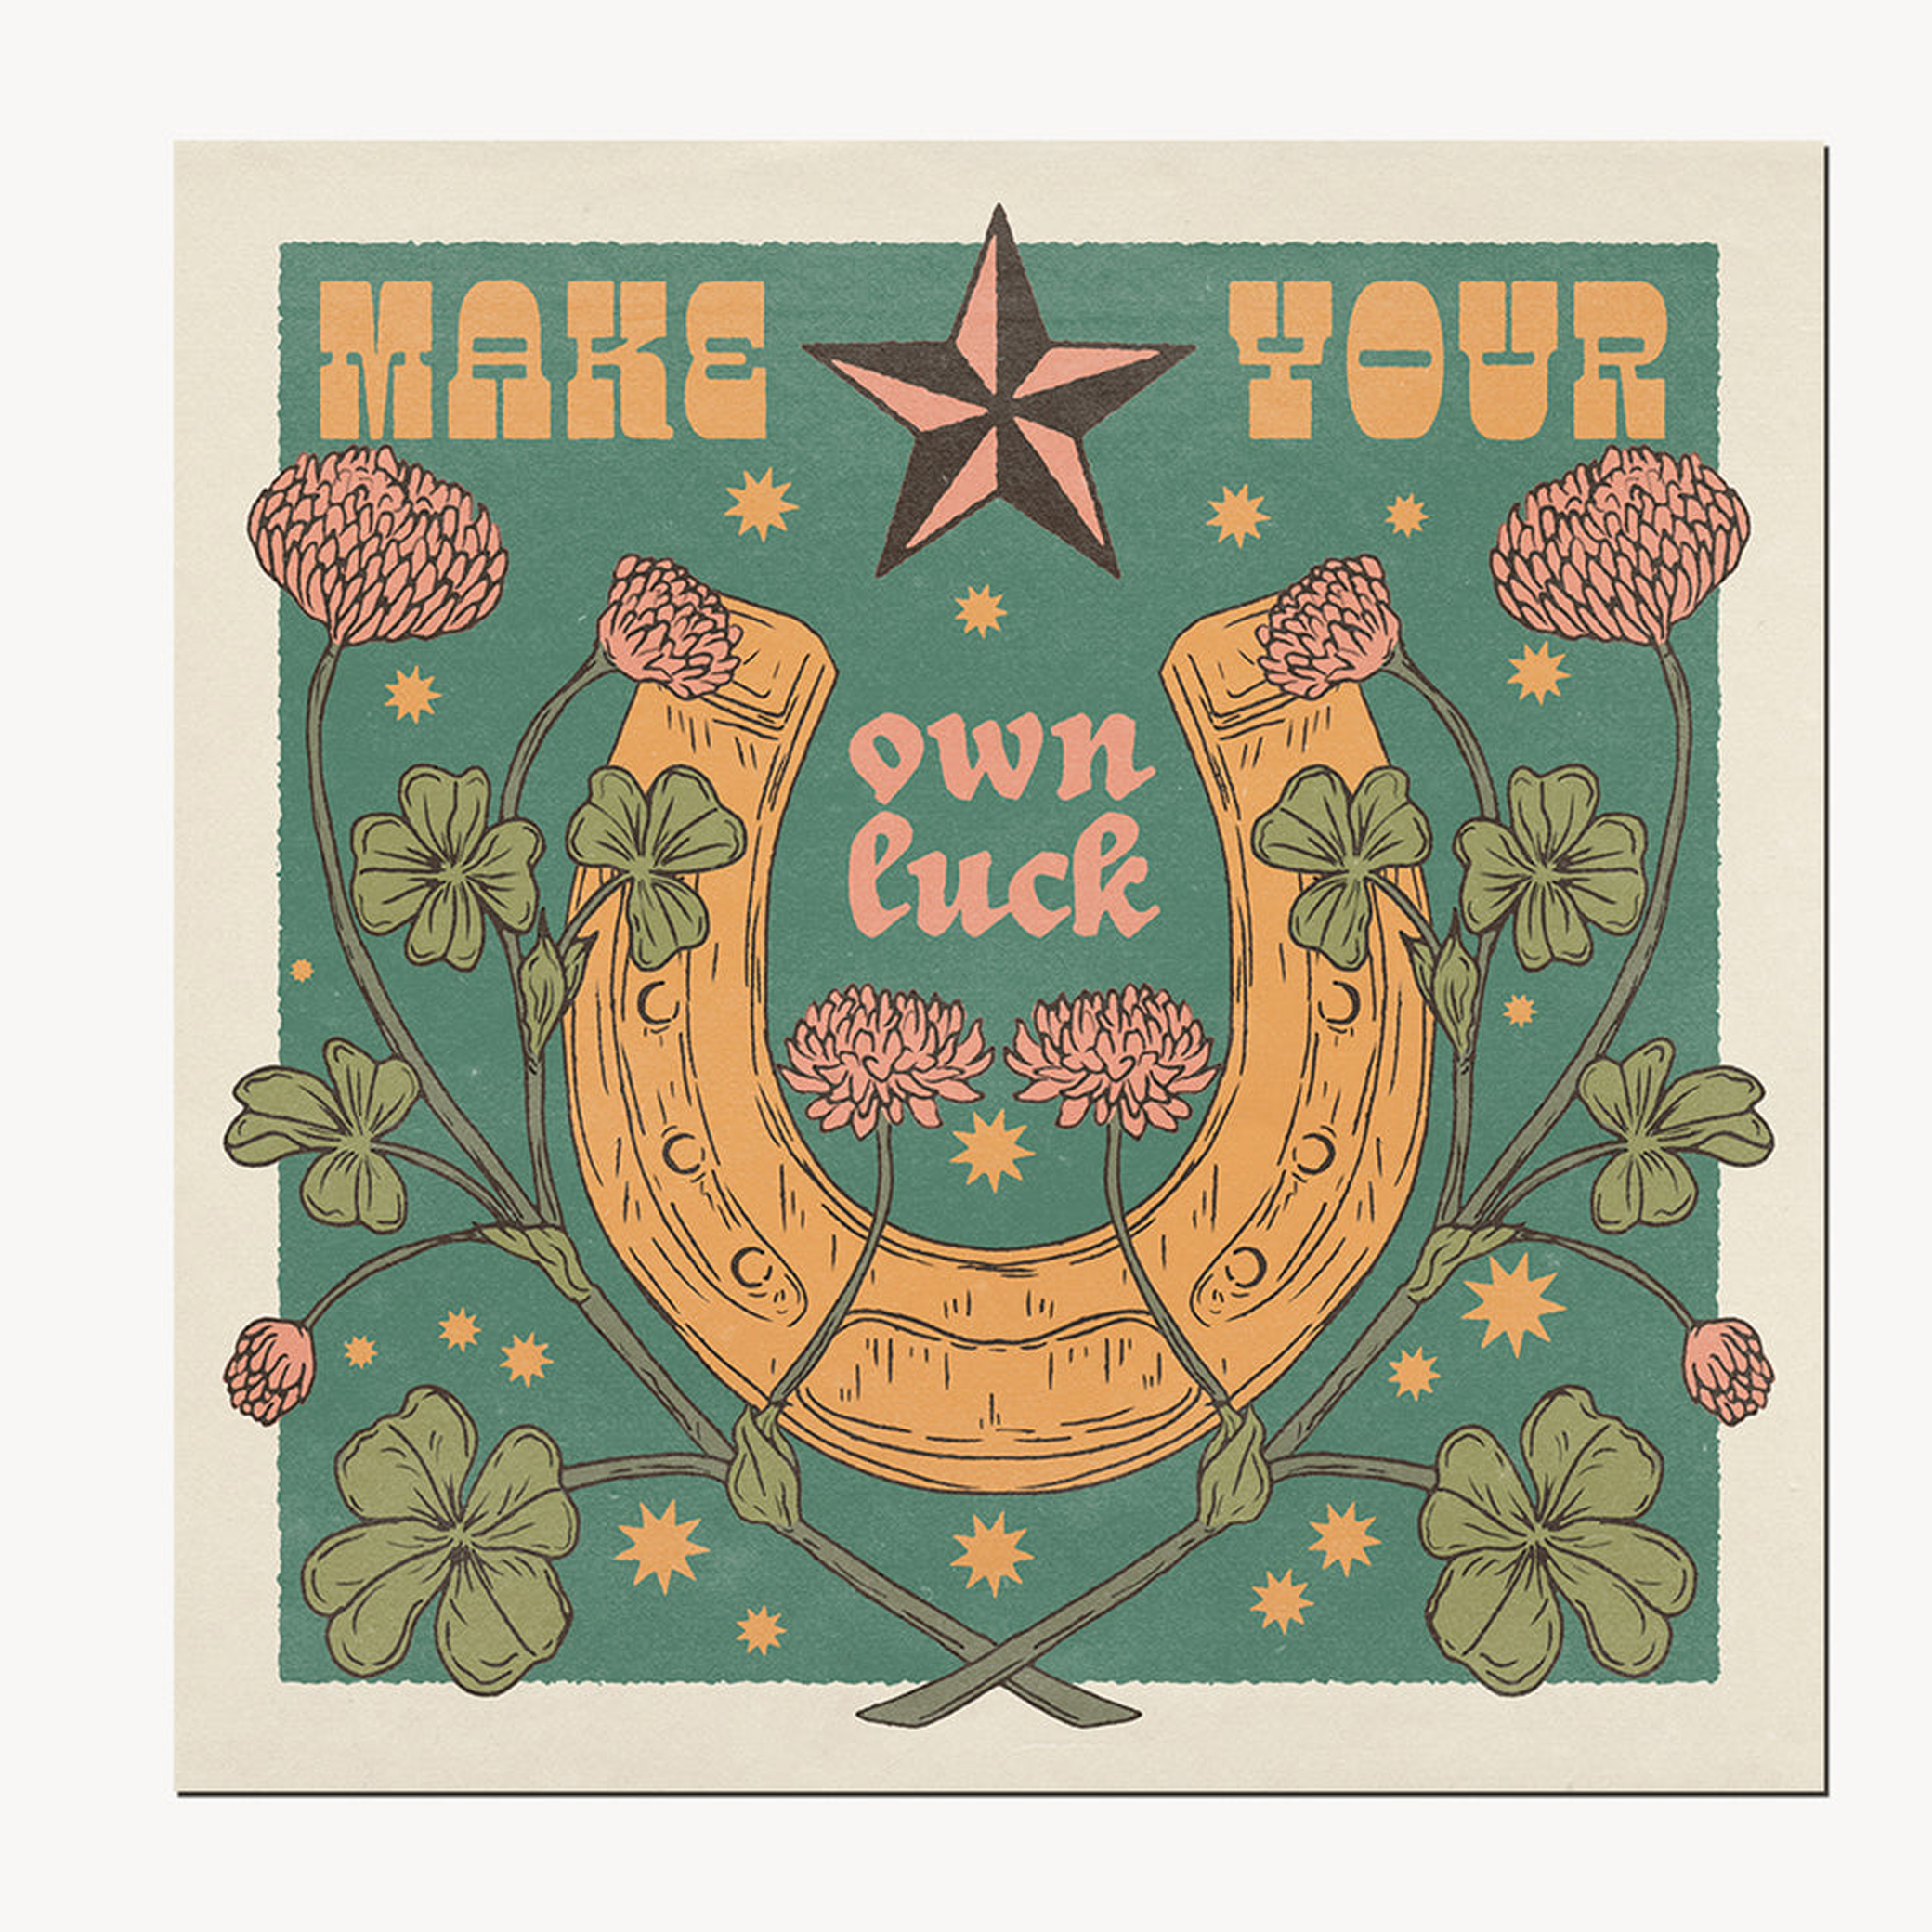 make-your-own-luck-print